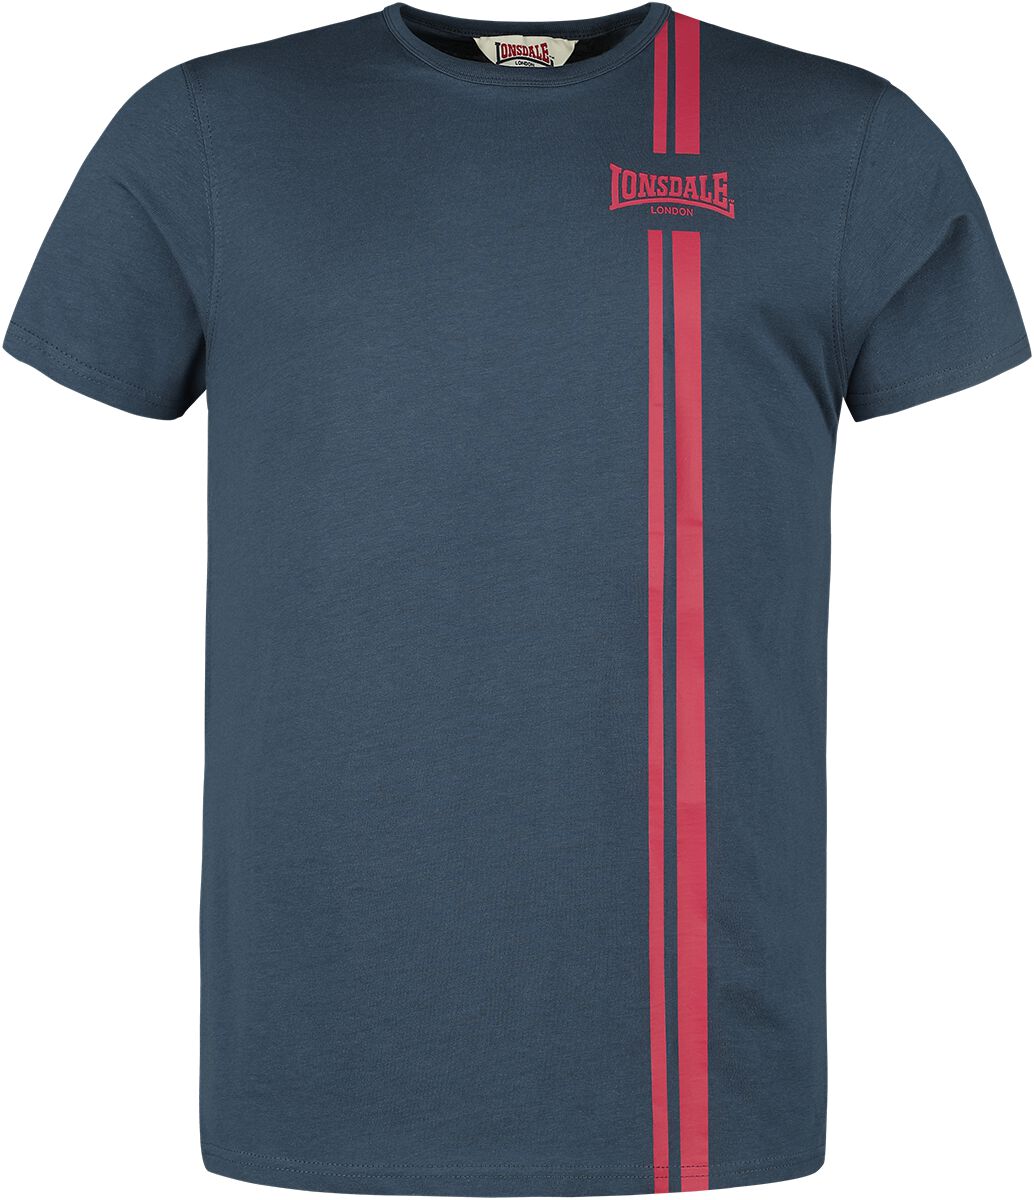 Lonsdale London INVERBROOM T-Shirt navy in L von Lonsdale London